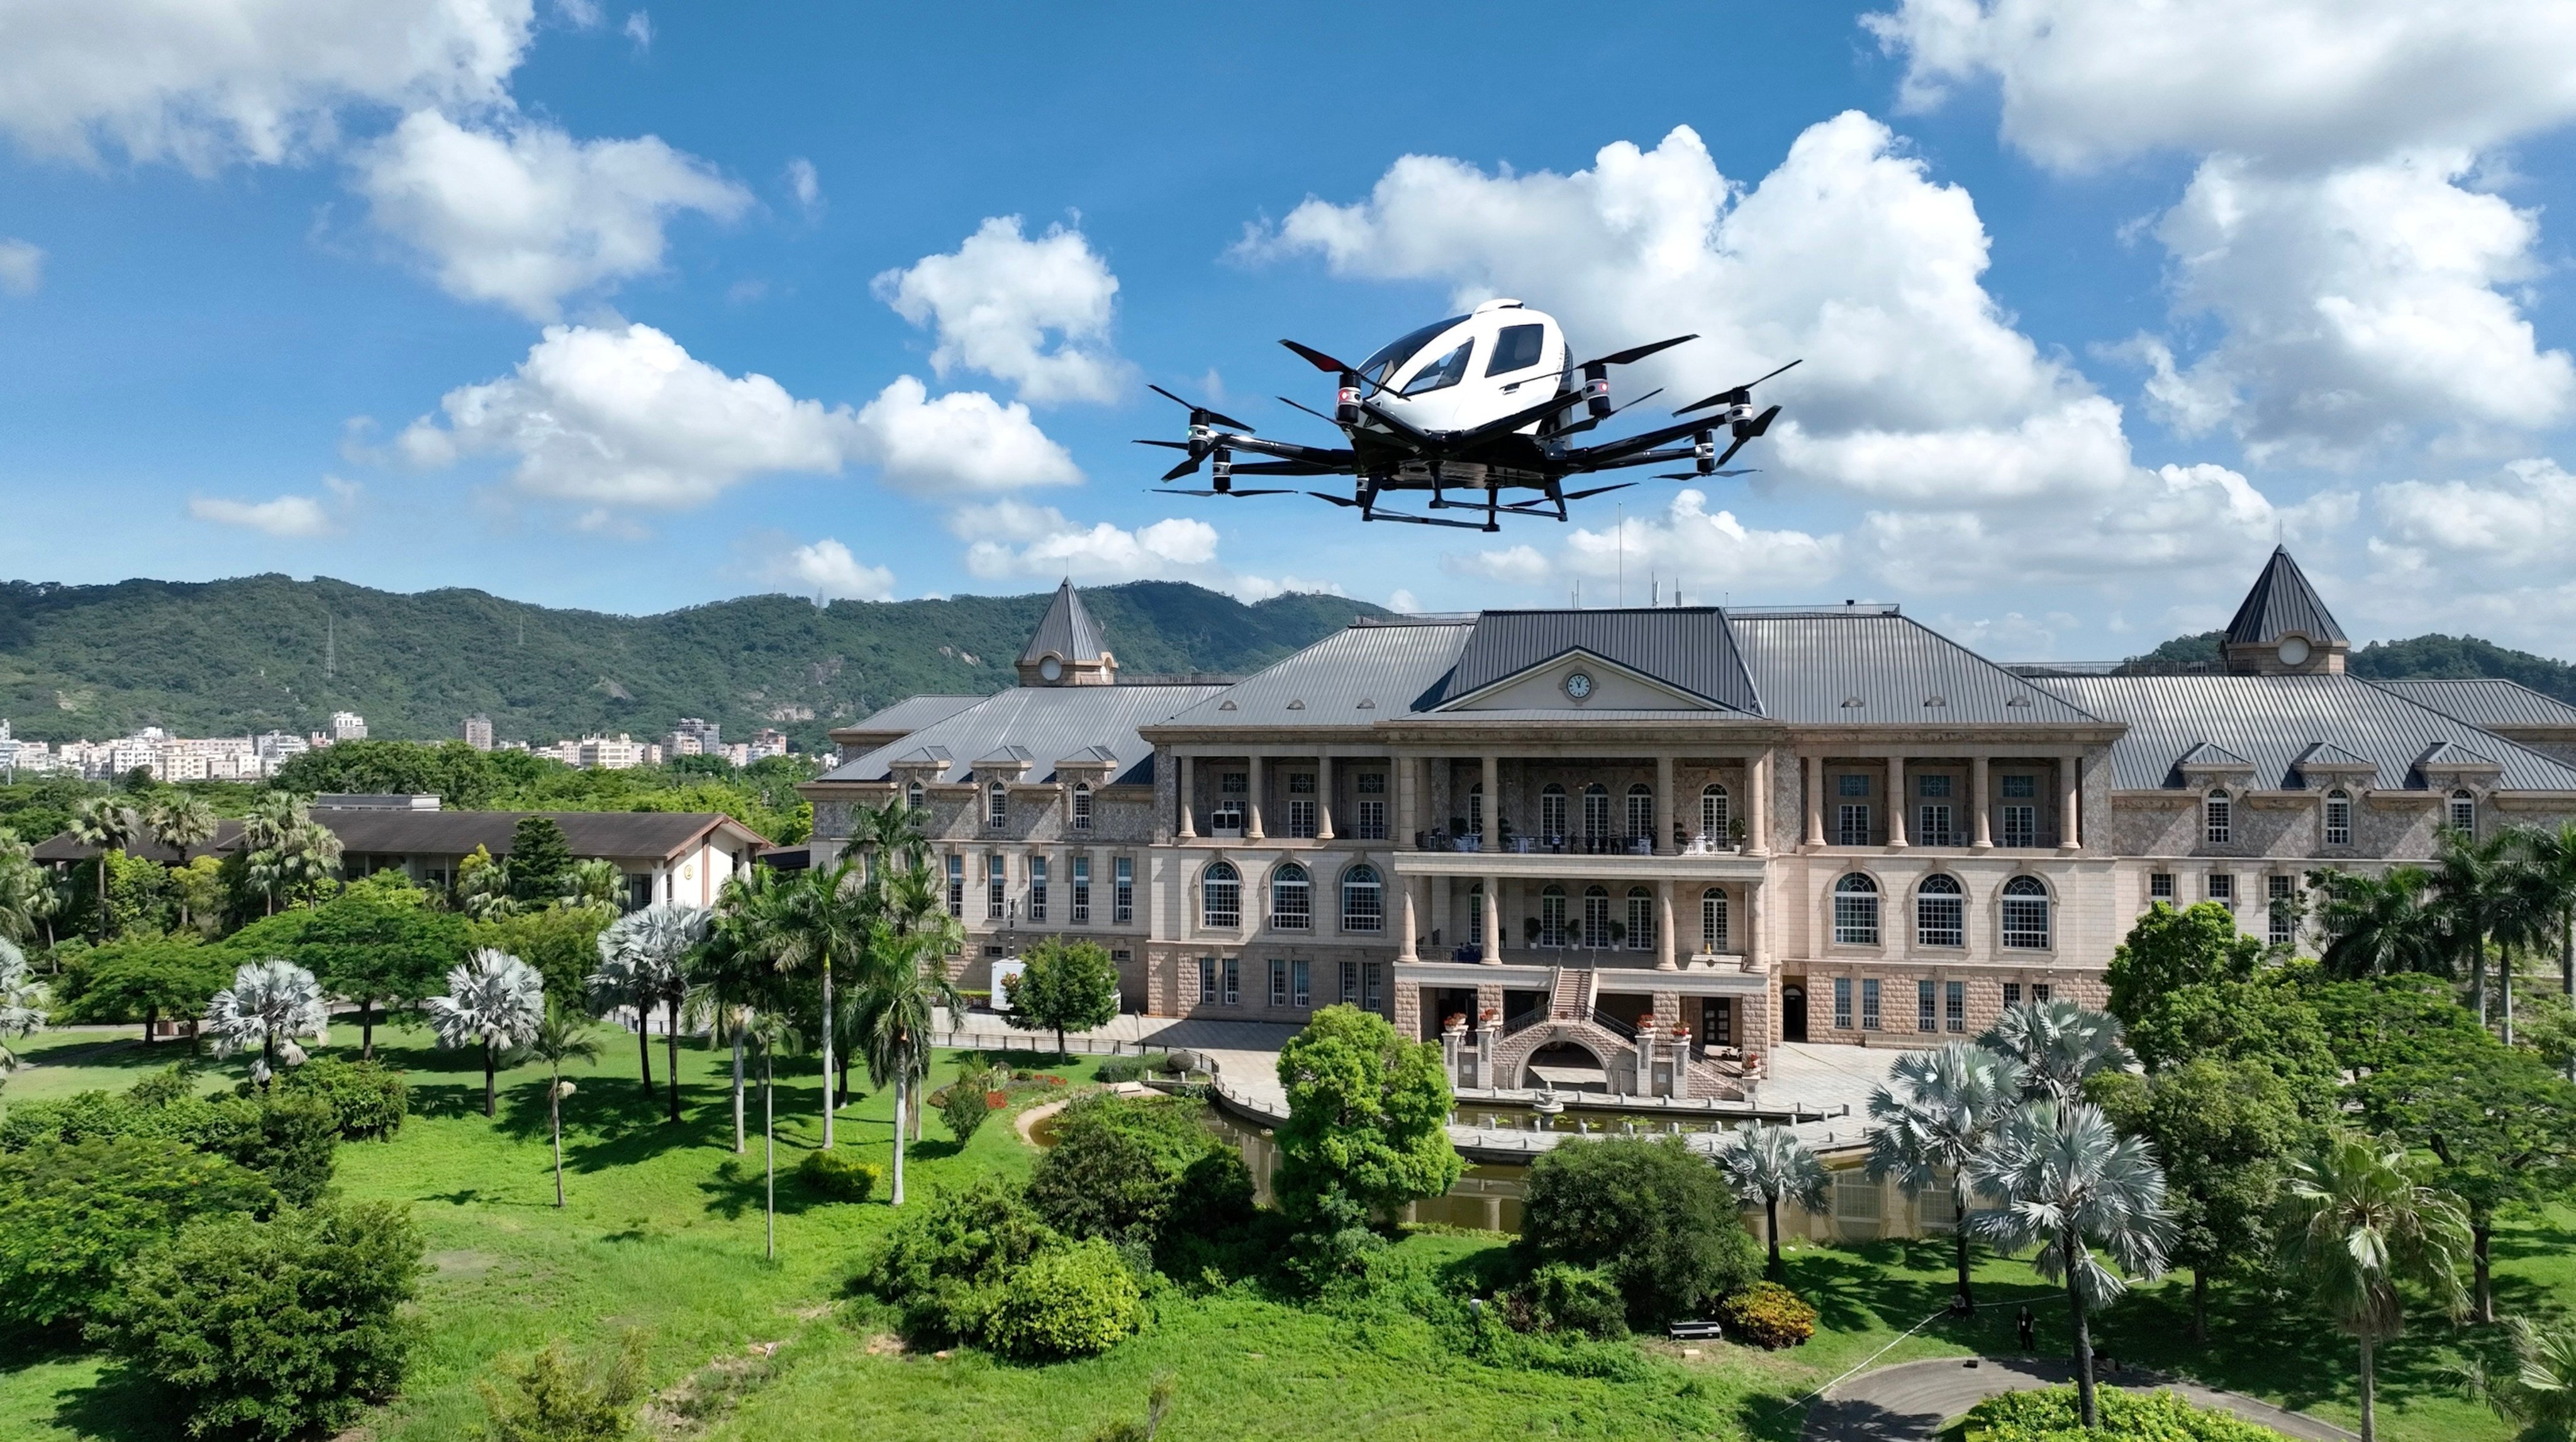 An EHang autonomous aerial vehicle conducting a demonstration flight at the Baoan District Low-Altitude Economy Investment Promotion Conference in Shenzhen last year. Photo: Handout